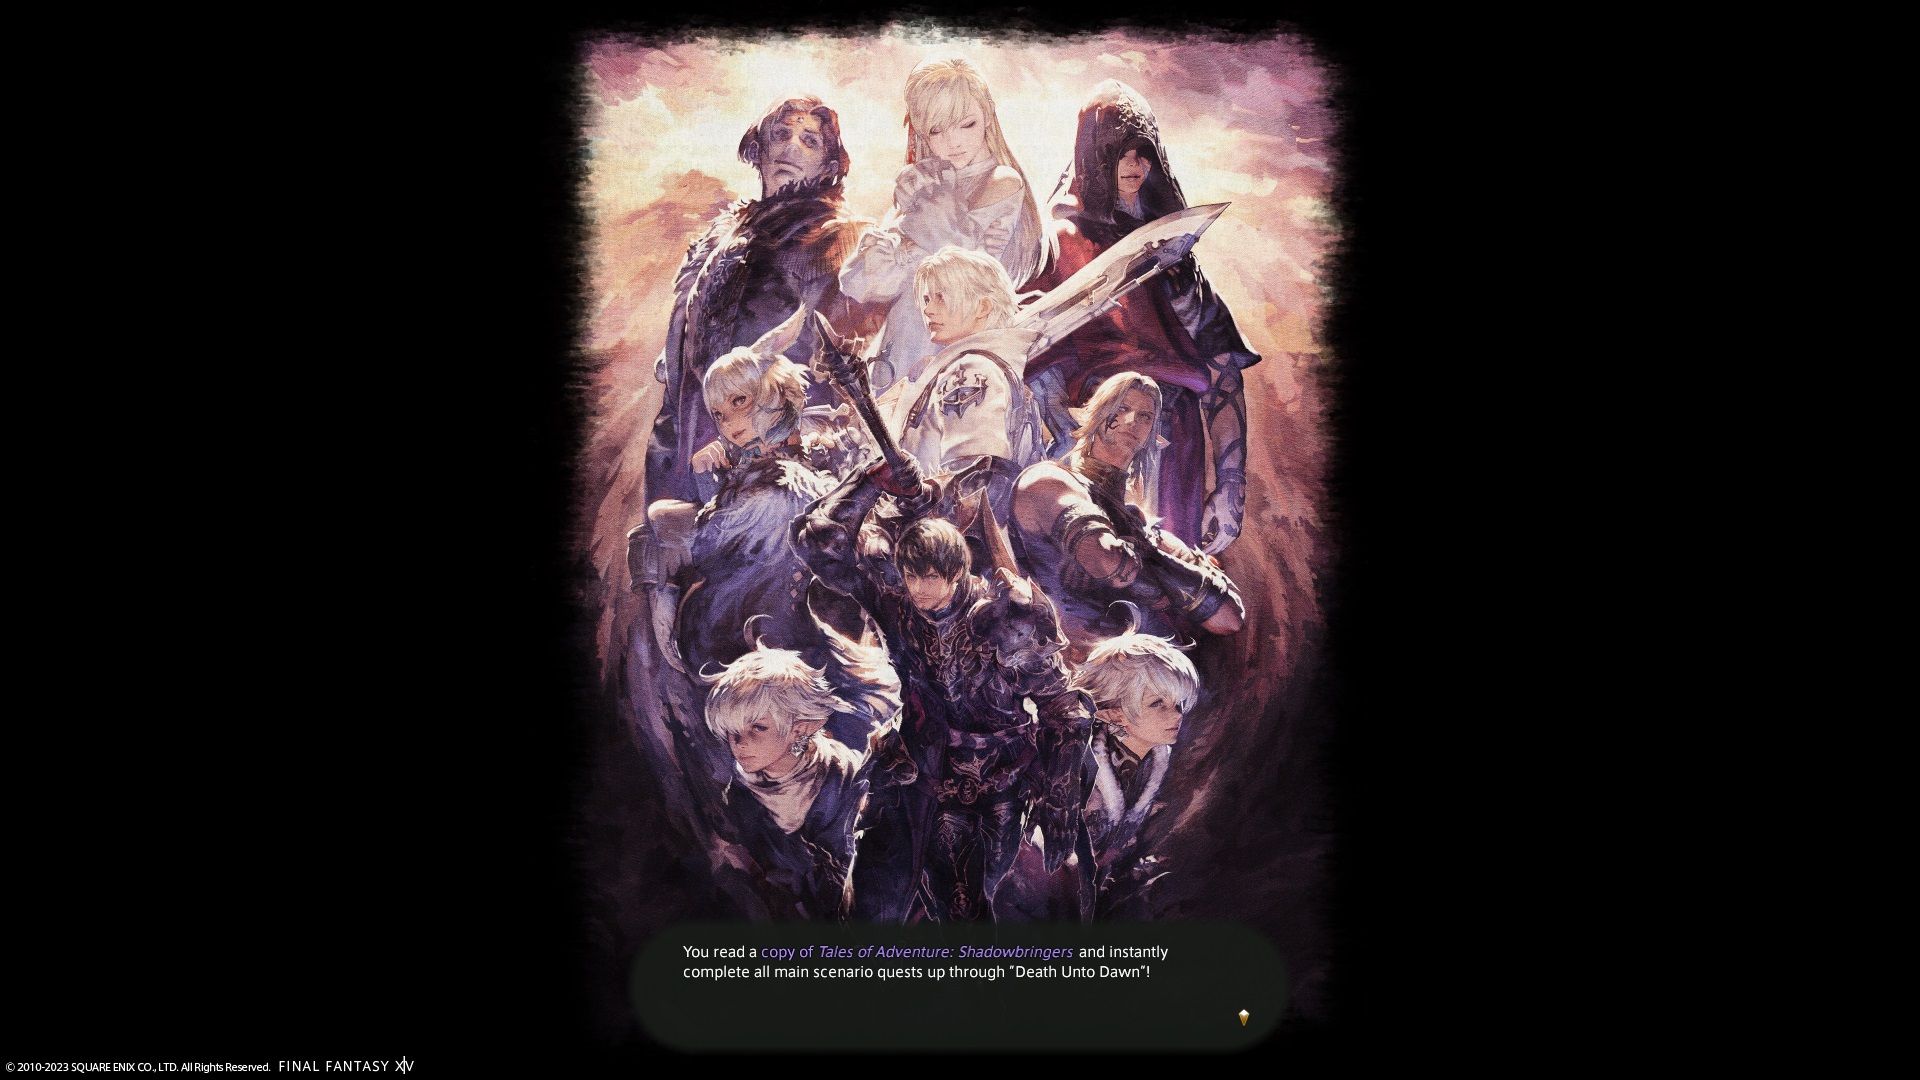 Final Fantasy 14 - The screen that displays after buying a main scenario quest skip that shows the Shadowbringers key artwork of the scions and Emet-selch.